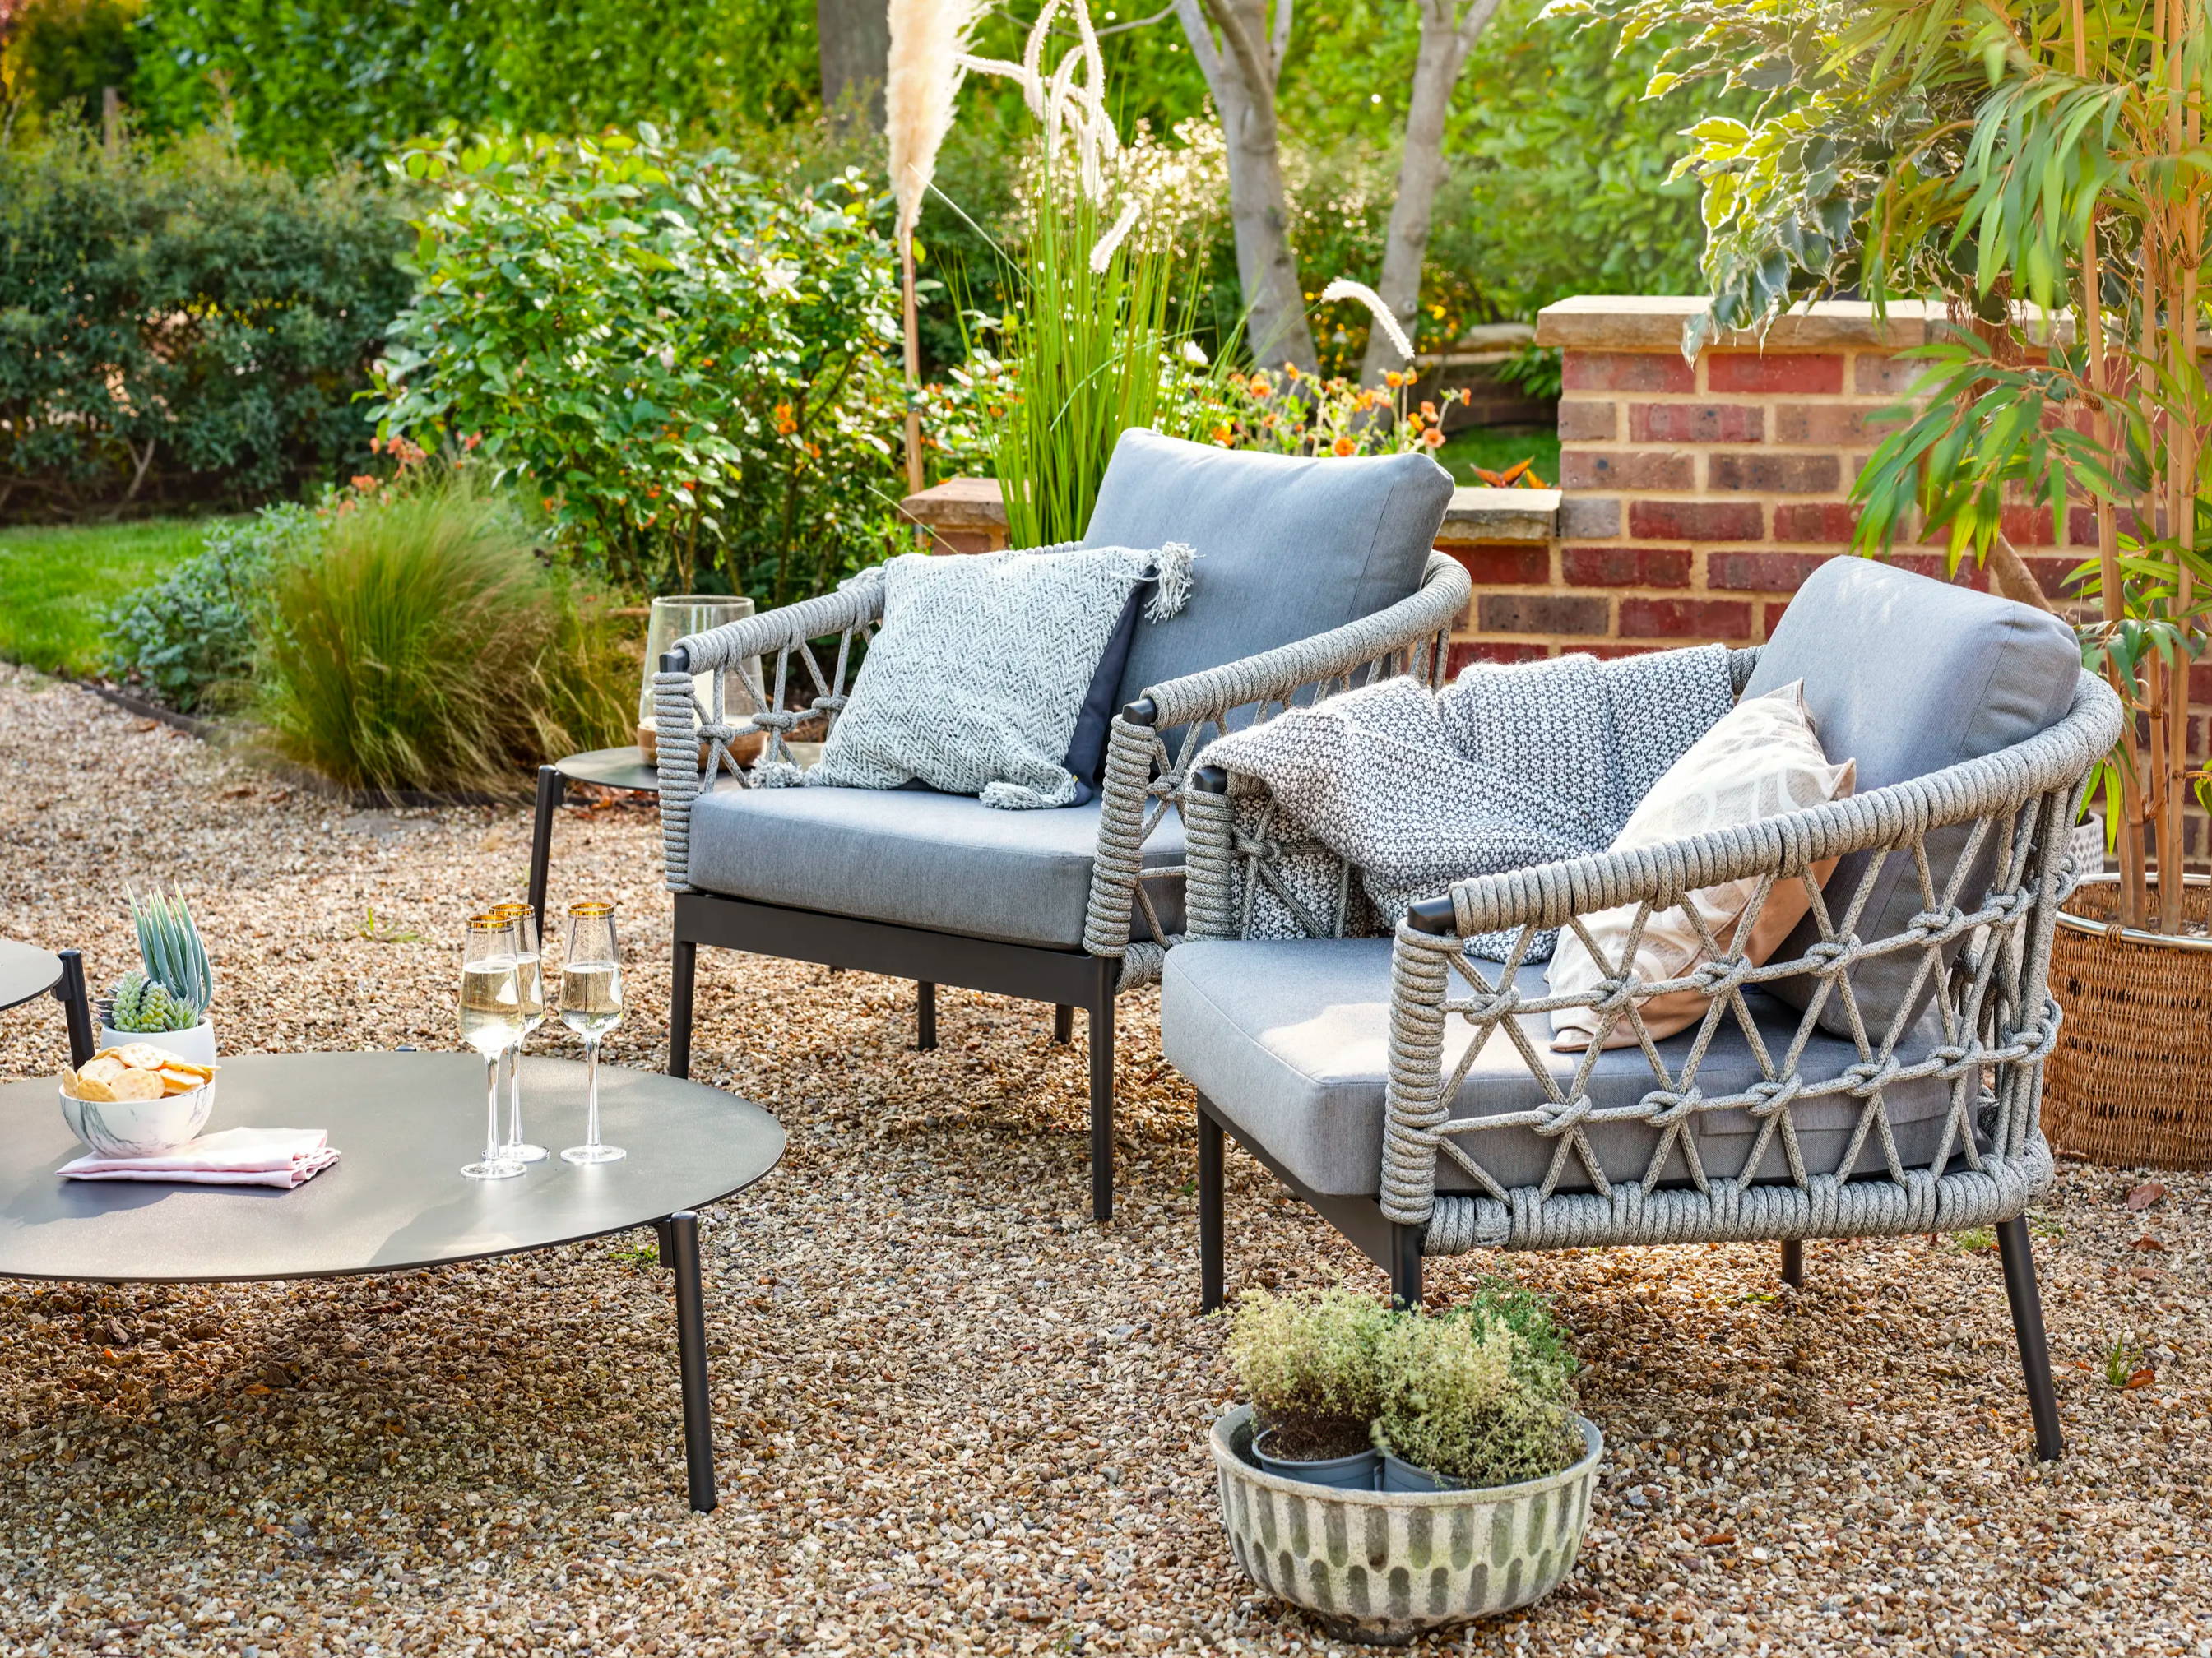 Two rope garden armchairs and coffee table with champagne on a shingle pathway.